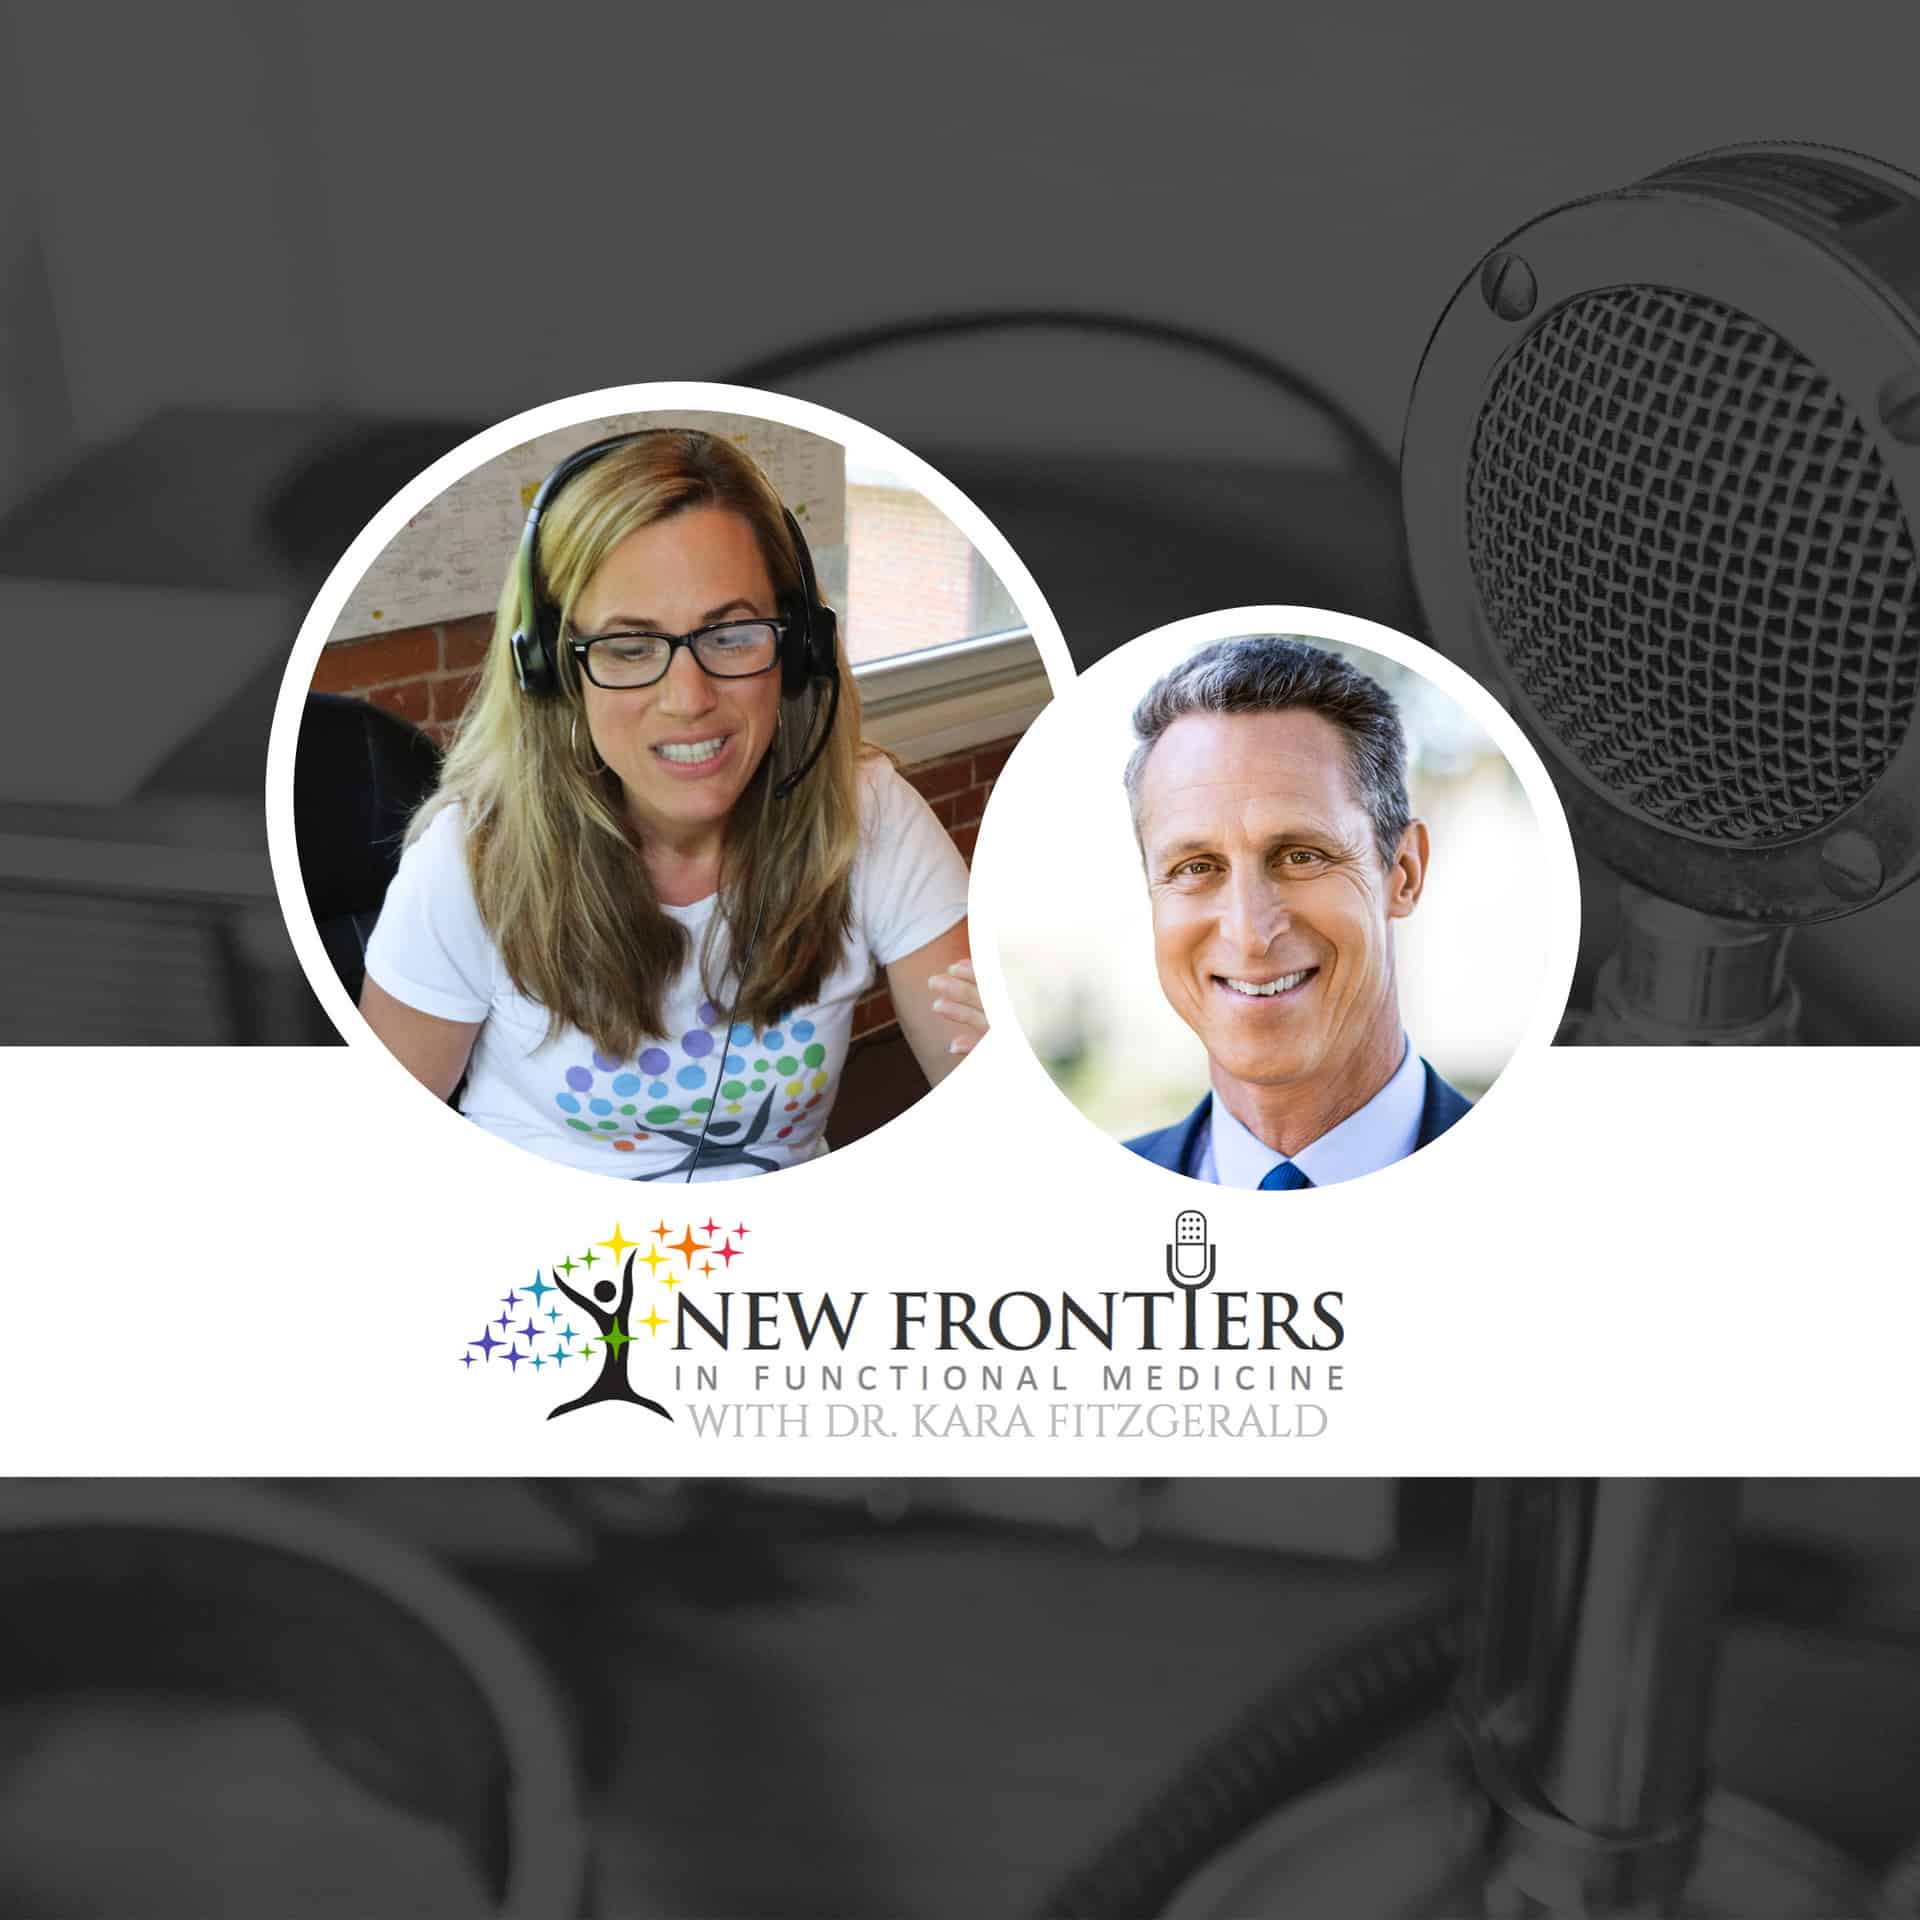 Episode 41: Food: What the Heck Should We Eat with Dr. Mark Hyman.